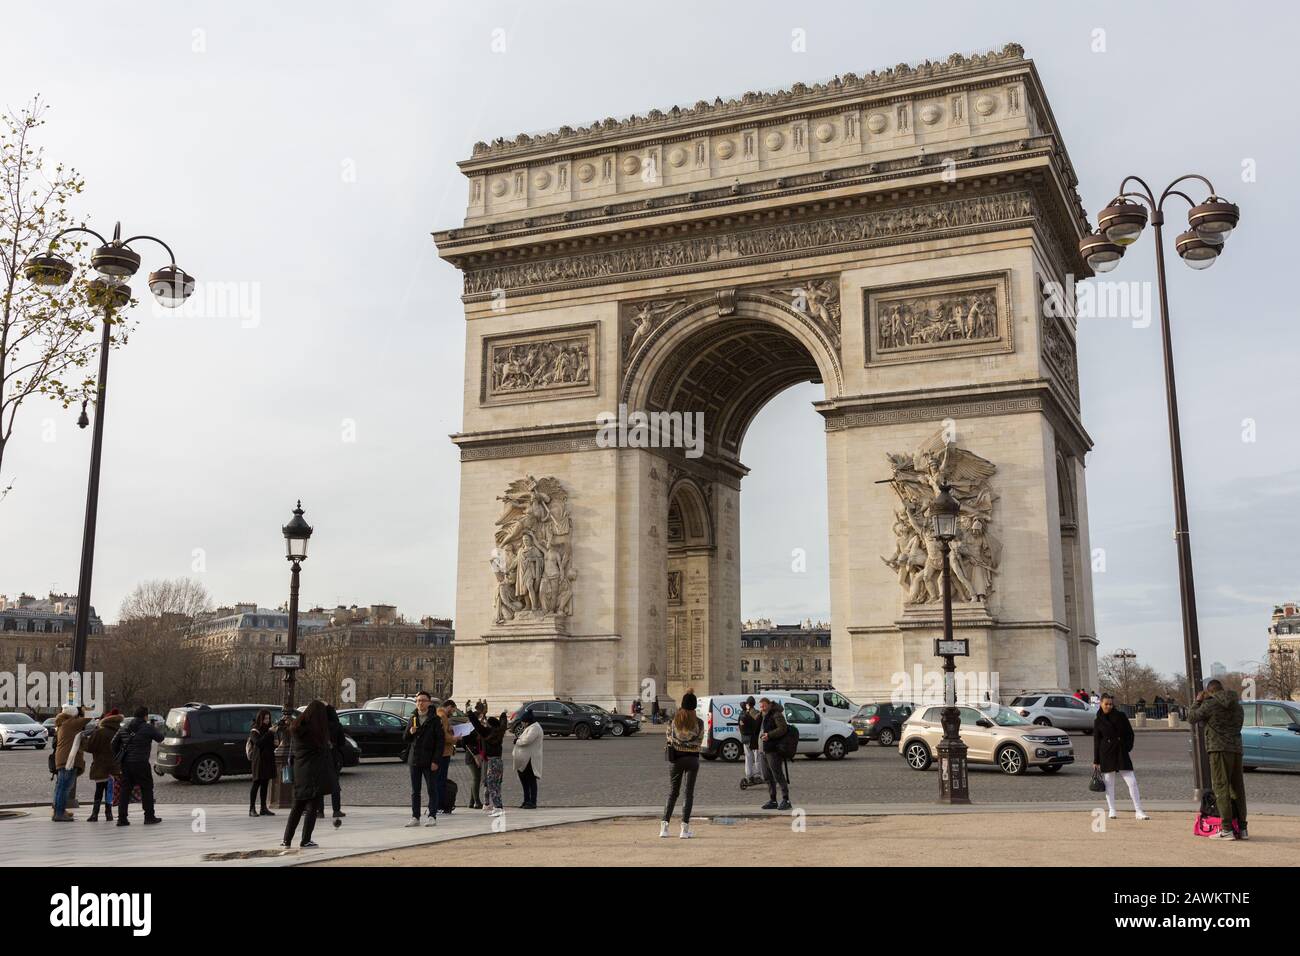 View on the Arc de Triomphe de l'Étoile (Triumphal Arch of the Star). Tourists and typical parisian traffic in the foreground. National monument. Stock Photo